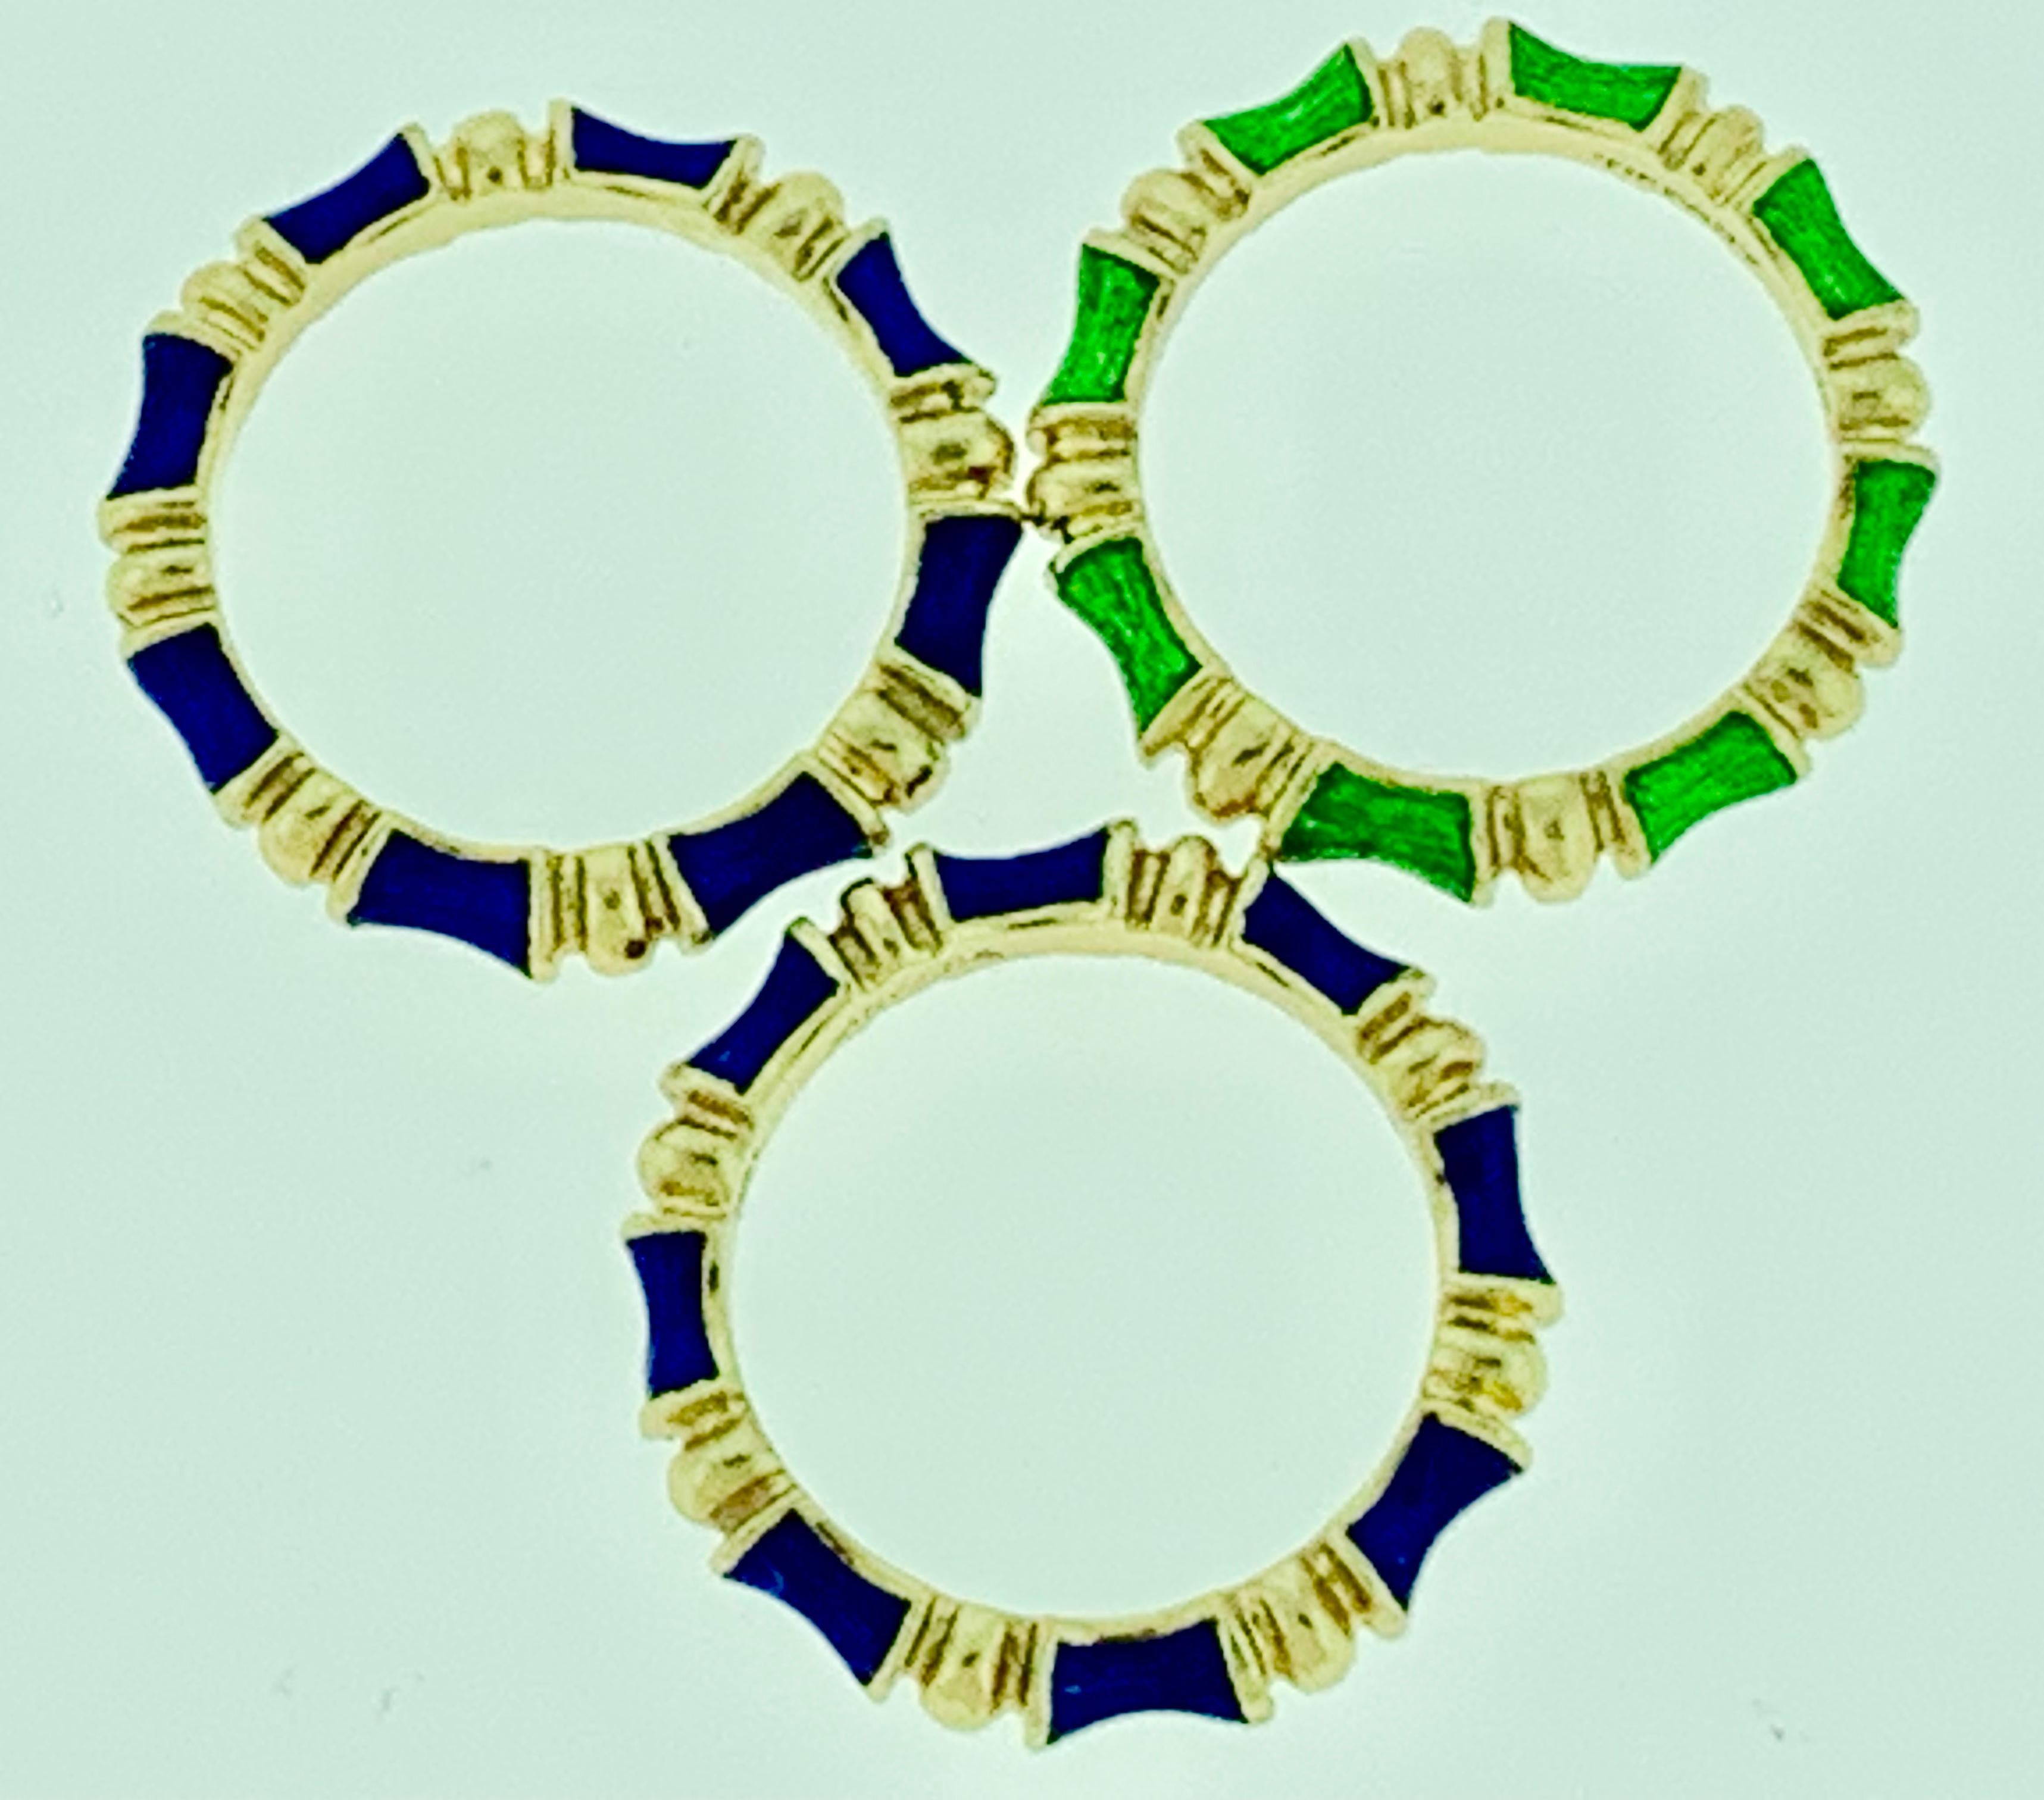 Vintage 1960s Bamboo Tiffany & Co   Schlumberger Two Blue one Green Enamel  set of 3 bands
An exquisite vintage Tiffany & Co blue  and Green enamel bamboo ring band set . The condition of the enamel in all the band is  superb 
Blue enamel you can